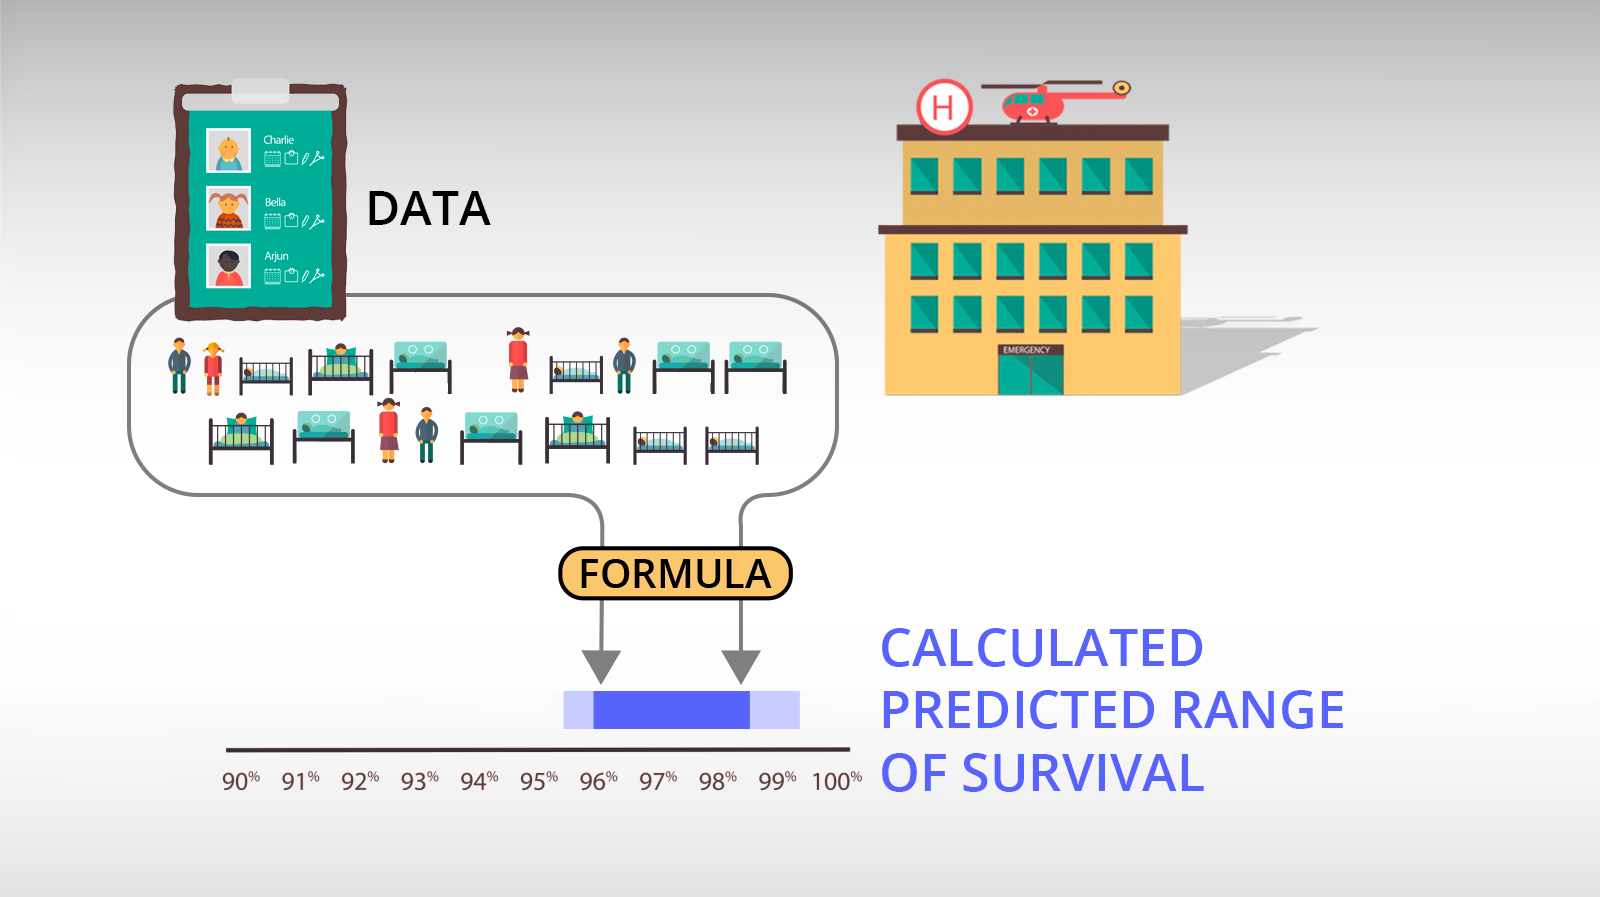 Data about the children treated determnes the predicted survival range